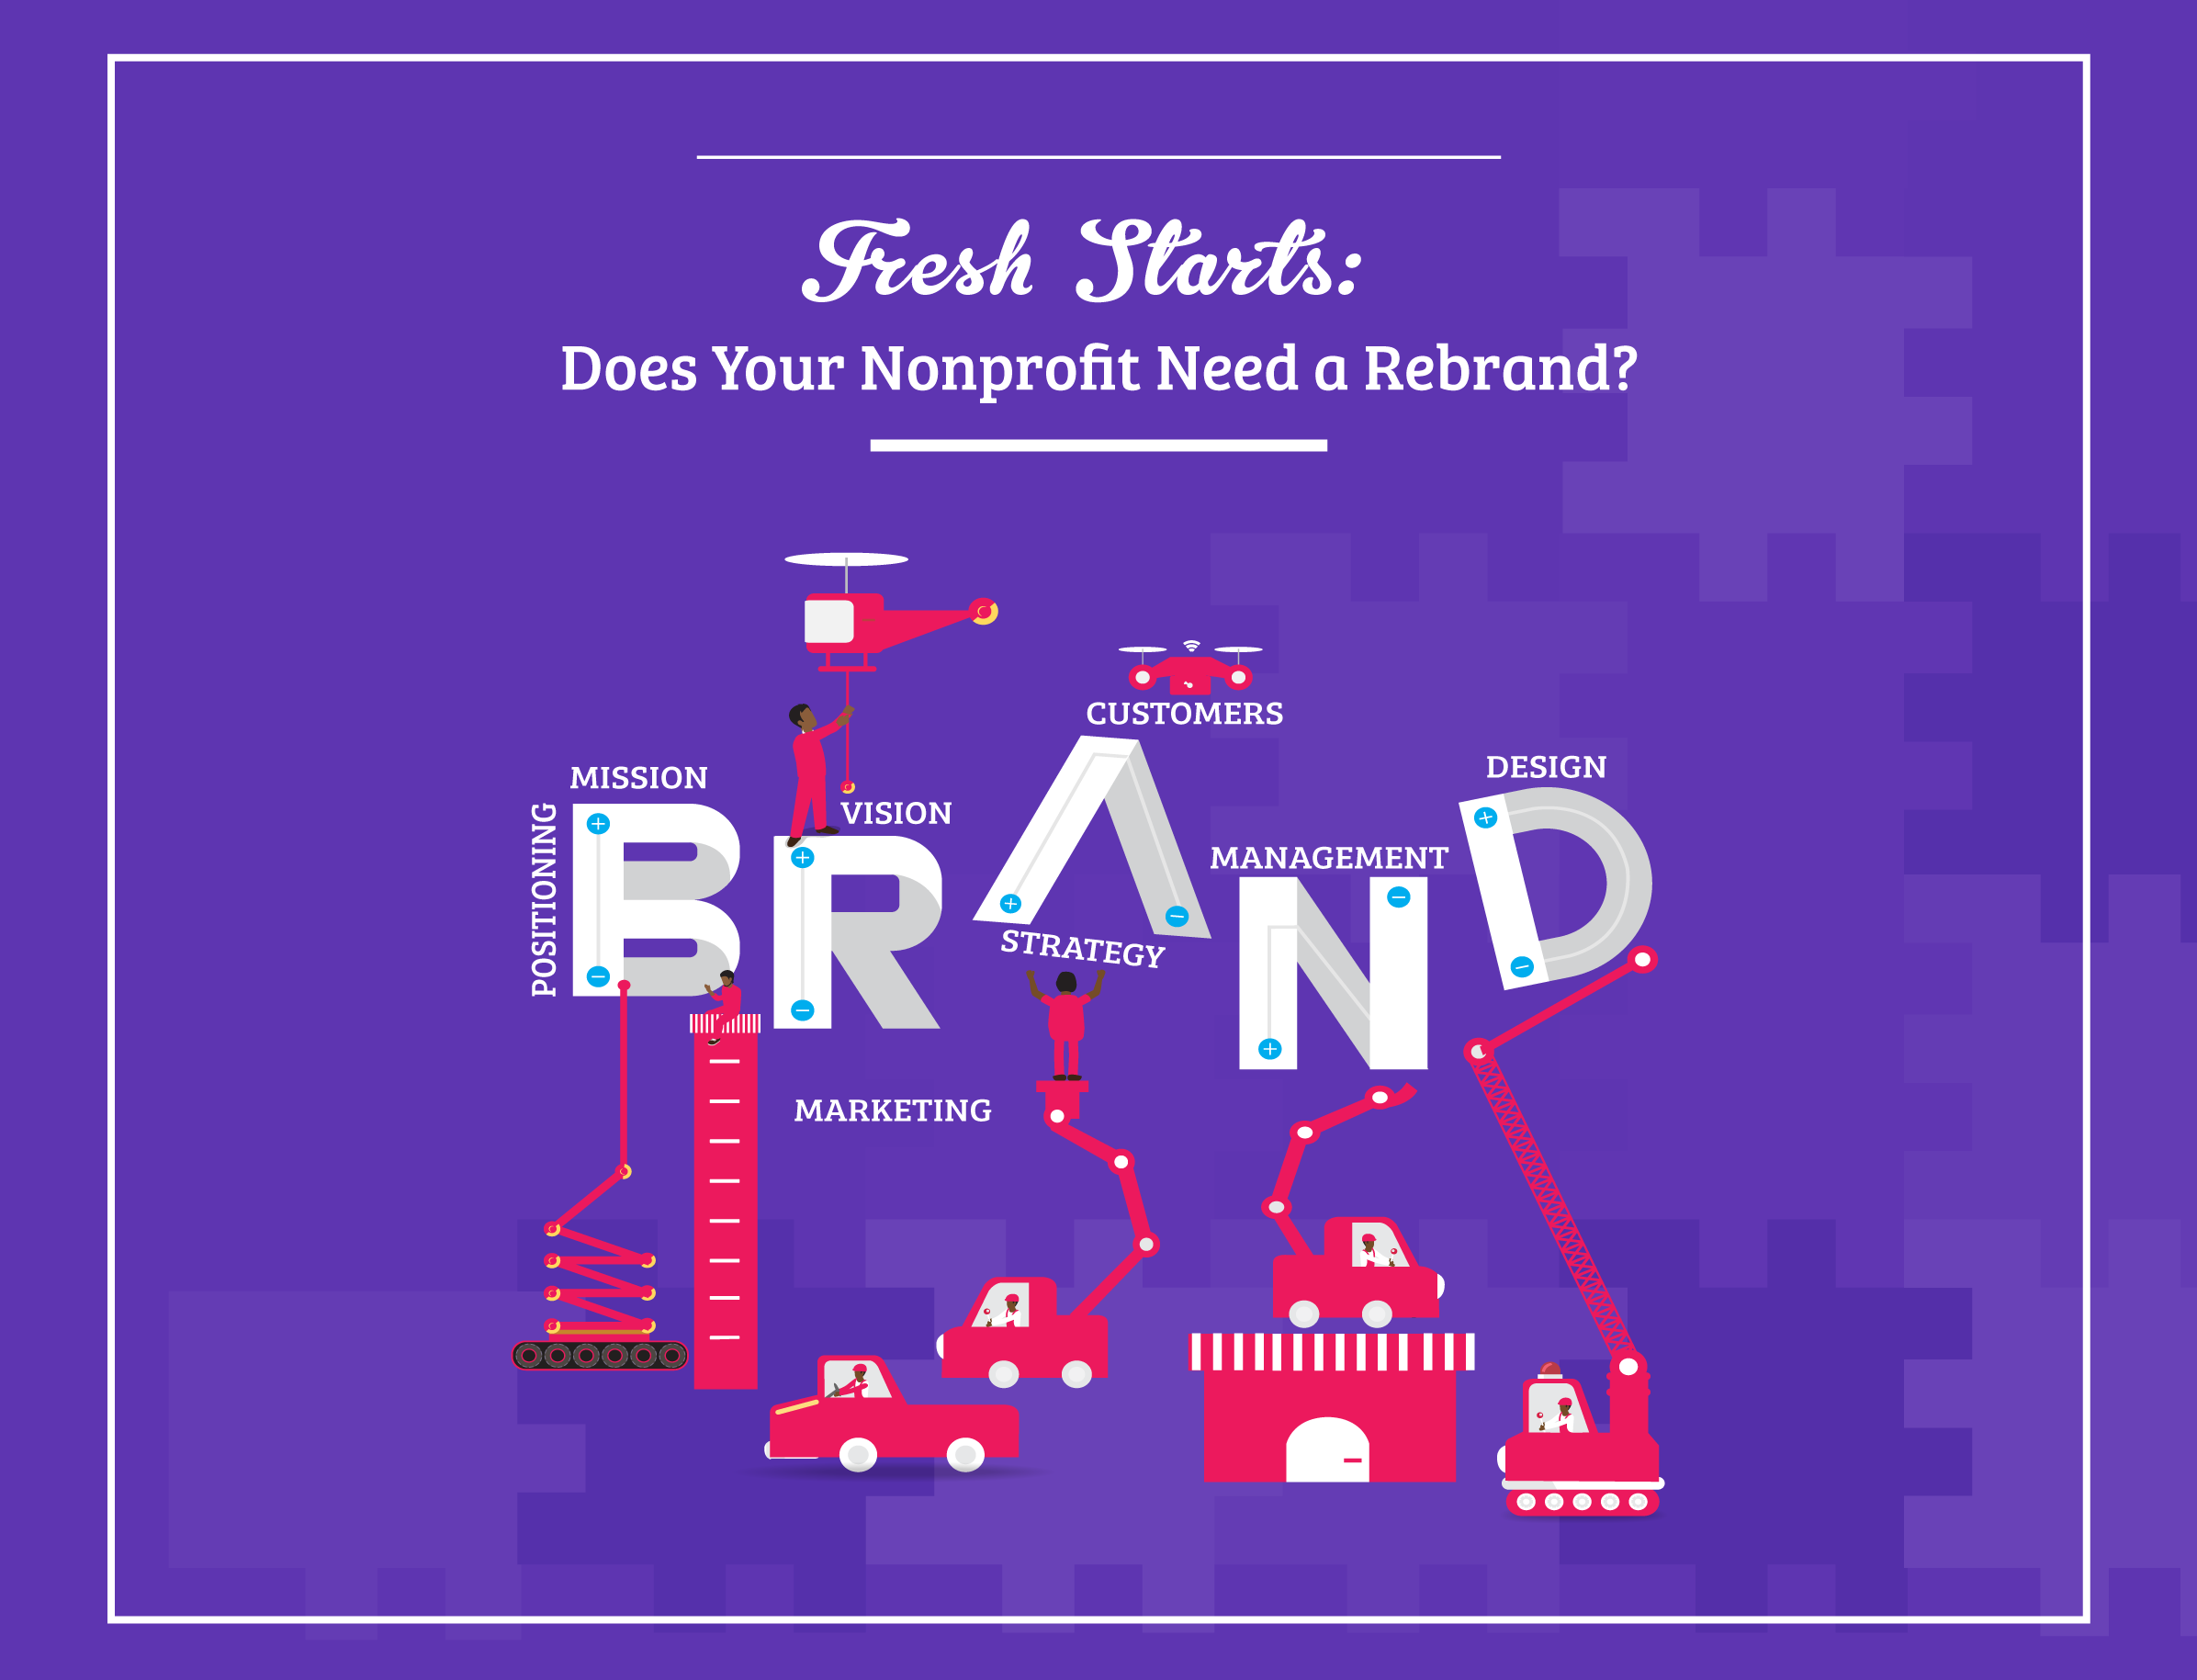 Fresh Starts: Does Your Nonprofit Need a Rebrand?